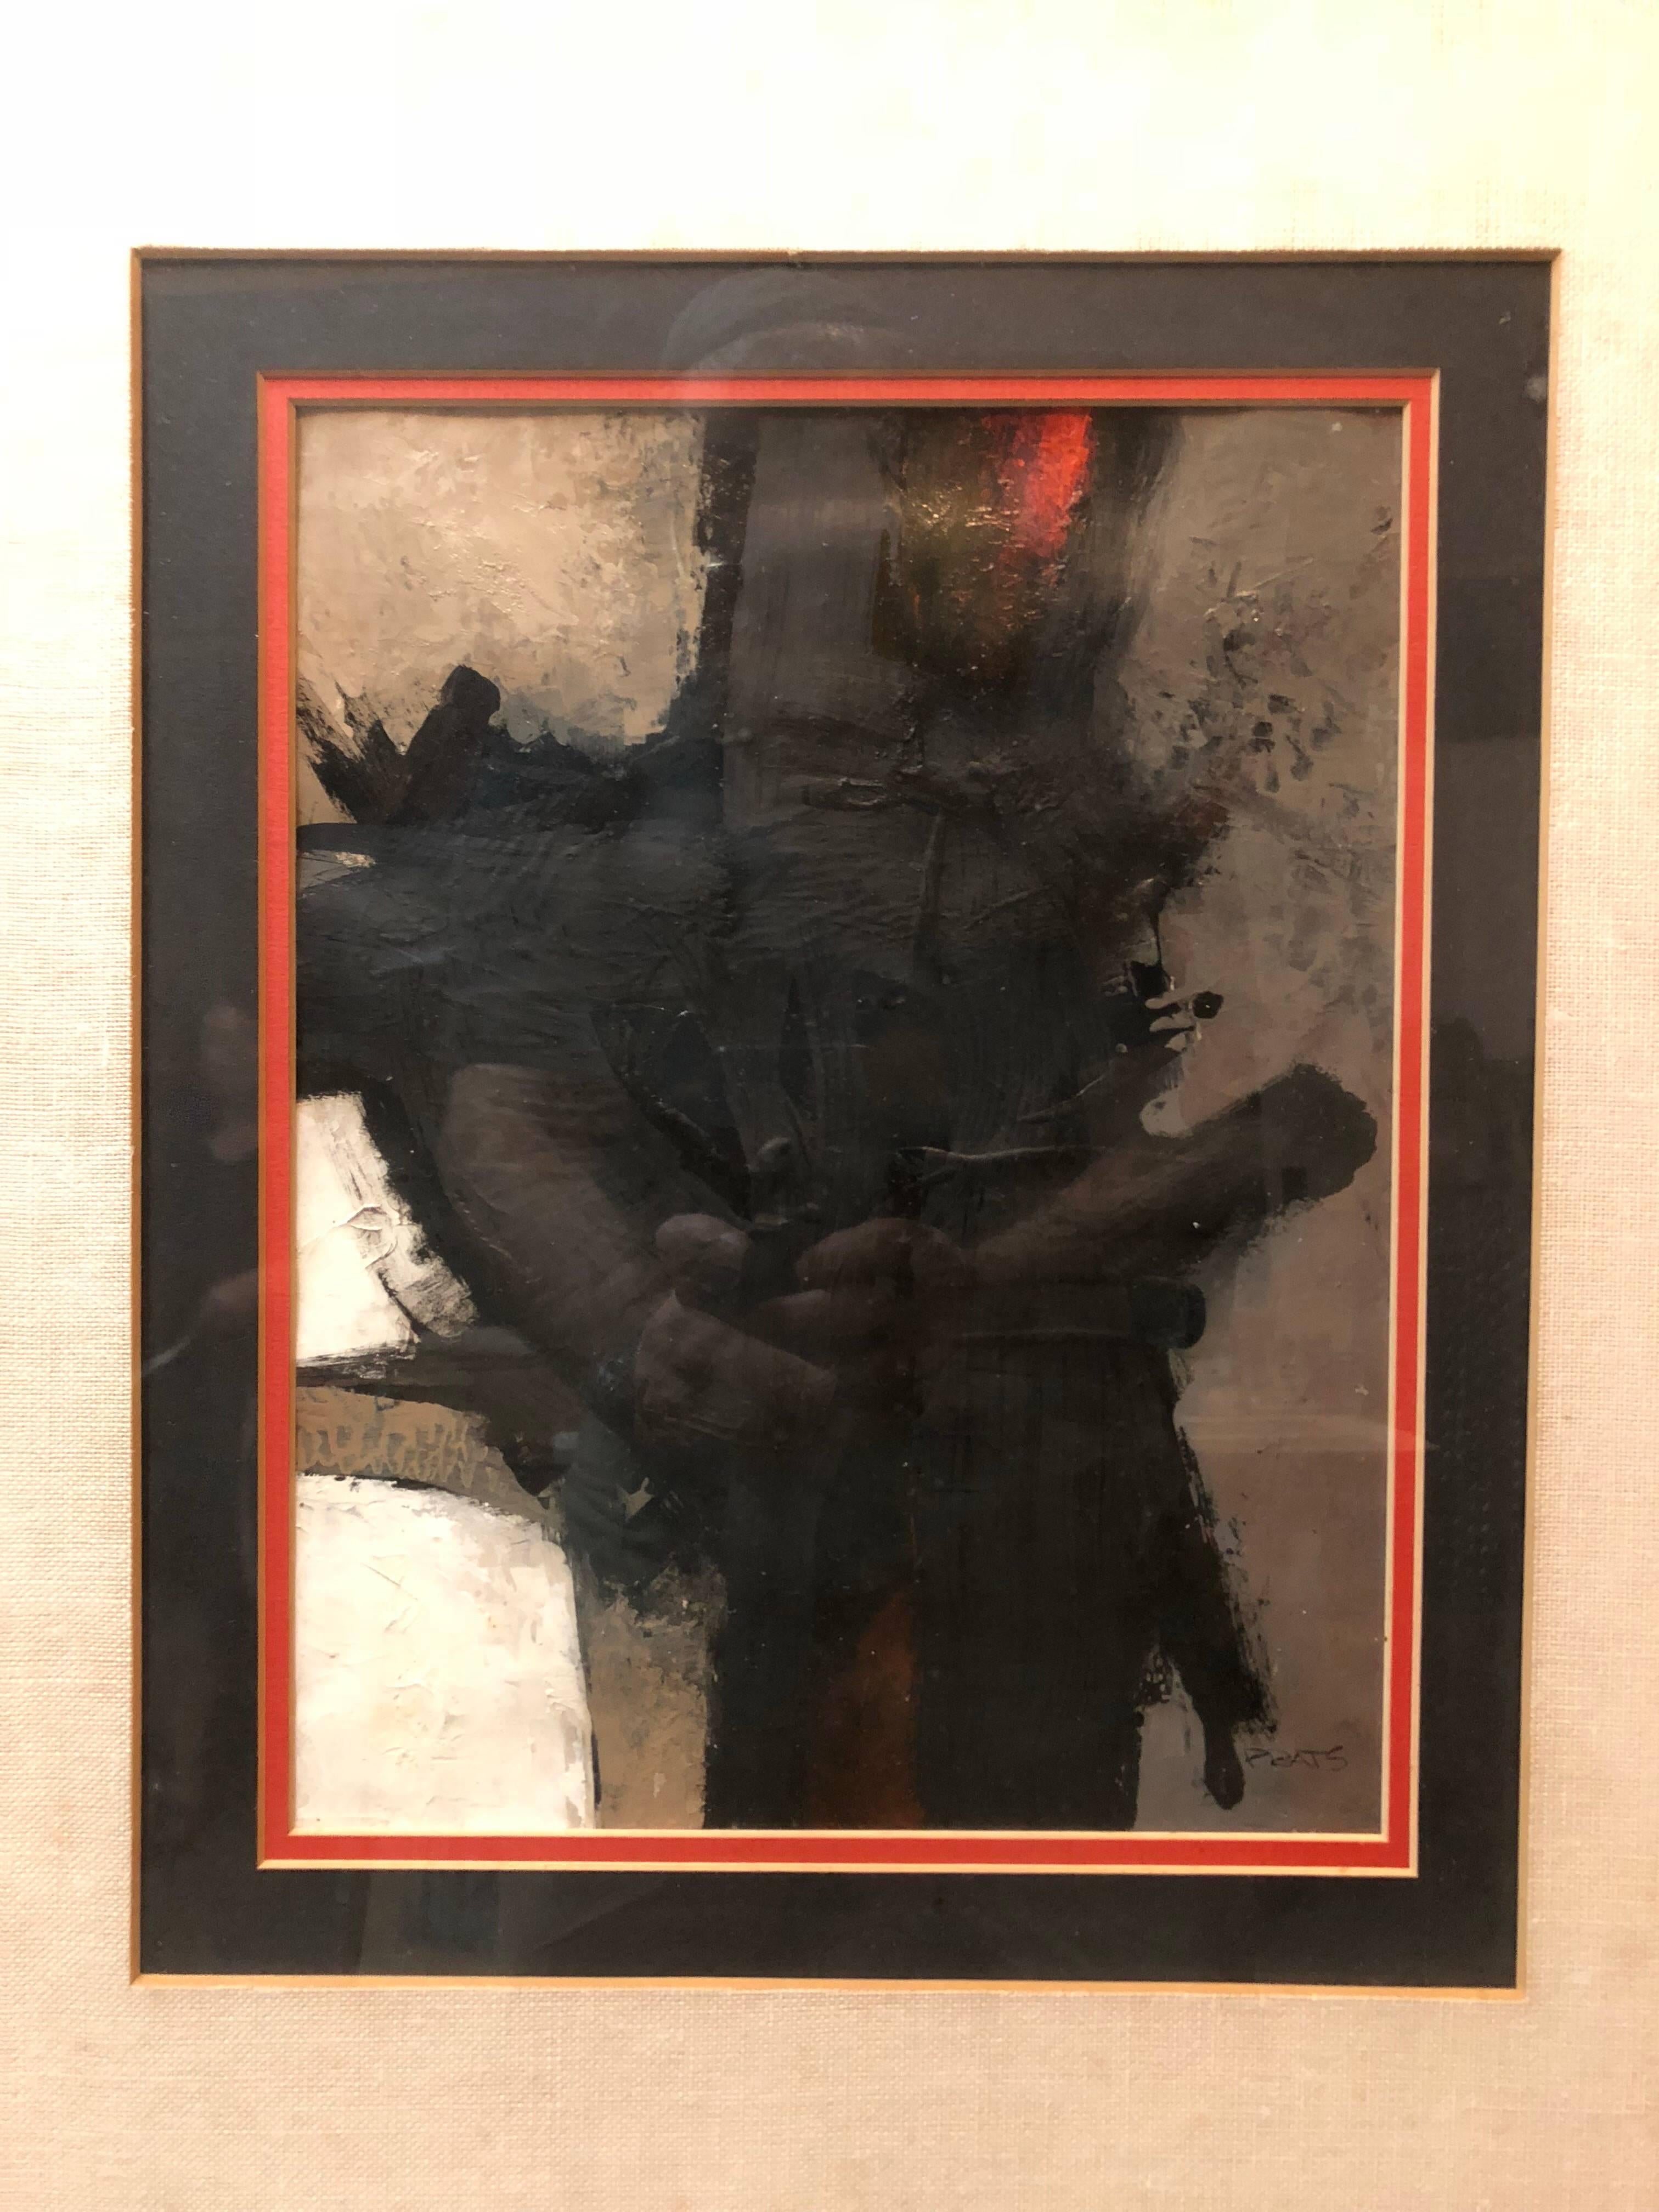 Genre: Modern
Subject: Abstract
Medium: Oil
Surface: Paper
Country: Spain
Dimensions w/Frame: 25 1/2 x 21 1/2

This original painting by Spanish artist Ramon Prats is moody and powerful. The colors are a mix of black, grays and reds ala Antoni